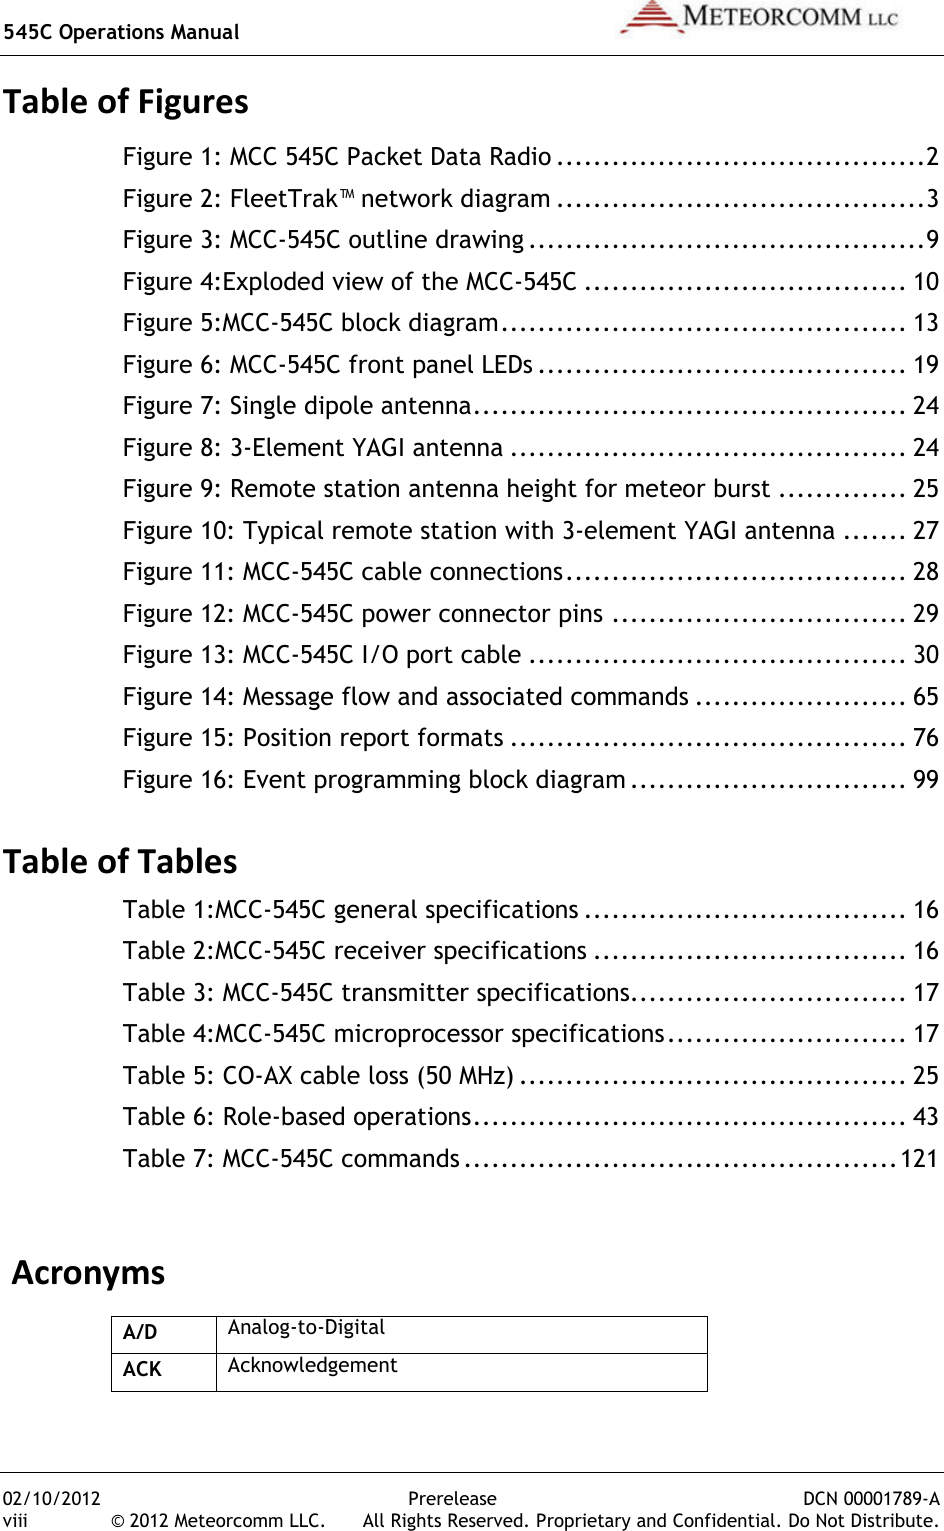 545C Operations Manual   02/10/2012  Prerelease  DCN 00001789-A viii  © 2012 Meteorcomm LLC.   All Rights Reserved. Proprietary and Confidential. Do Not Distribute. Table of Figures Figure 1: MCC 545C Packet Data Radio ........................................ 2 Figure 2: FleetTrak™ network diagram ........................................ 3 Figure 3: MCC-545C outline drawing ........................................... 9 Figure 4:Exploded view of the MCC-545C ................................... 10 Figure 5:MCC-545C block diagram ............................................ 13 Figure 6: MCC-545C front panel LEDs ........................................ 19 Figure 7: Single dipole antenna ............................................... 24 Figure 8: 3-Element YAGI antenna ........................................... 24 Figure 9: Remote station antenna height for meteor burst .............. 25 Figure 10: Typical remote station with 3-element YAGI antenna ....... 27 Figure 11: MCC-545C cable connections ..................................... 28 Figure 12: MCC-545C power connector pins ................................ 29 Figure 13: MCC-545C I/O port cable ......................................... 30 Figure 14: Message flow and associated commands ....................... 65 Figure 15: Position report formats ........................................... 76 Figure 16: Event programming block diagram .............................. 99  Table of Tables Table 1:MCC-545C general specifications ................................... 16 Table 2:MCC-545C receiver specifications .................................. 16 Table 3: MCC-545C transmitter specifications.............................. 17 Table 4:MCC-545C microprocessor specifications .......................... 17 Table 5: CO-AX cable loss (50 MHz) .......................................... 25 Table 6: Role-based operations ............................................... 43 Table 7: MCC-545C commands ............................................... 121  Acronyms A/D Analog-to-Digital ACK Acknowledgement 